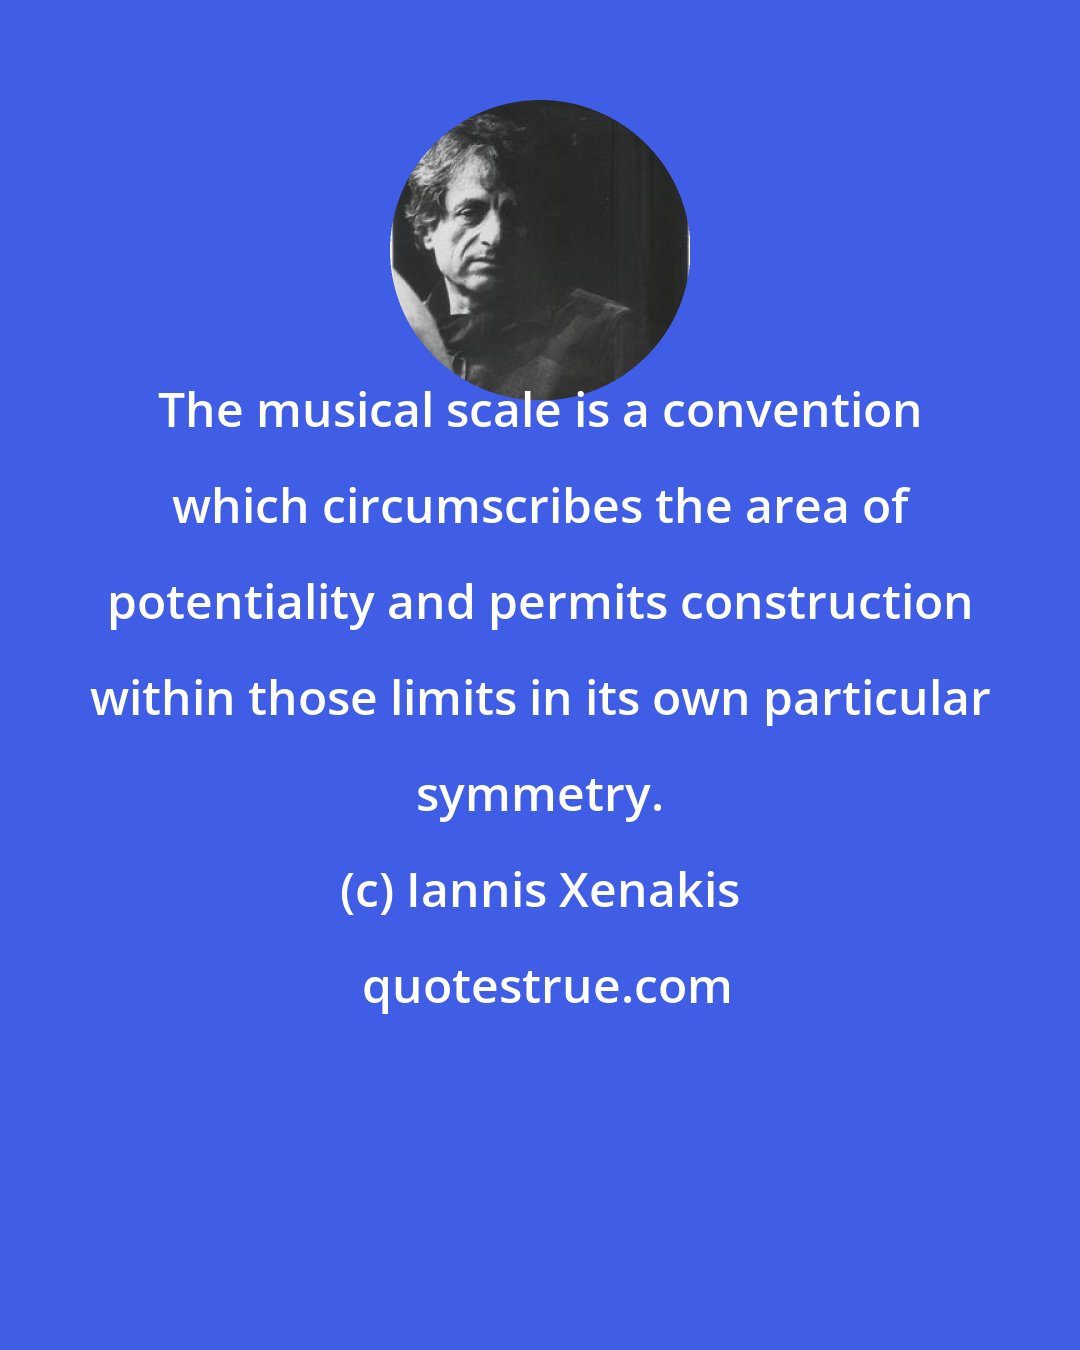 Iannis Xenakis: The musical scale is a convention which circumscribes the area of potentiality and permits construction within those limits in its own particular symmetry.